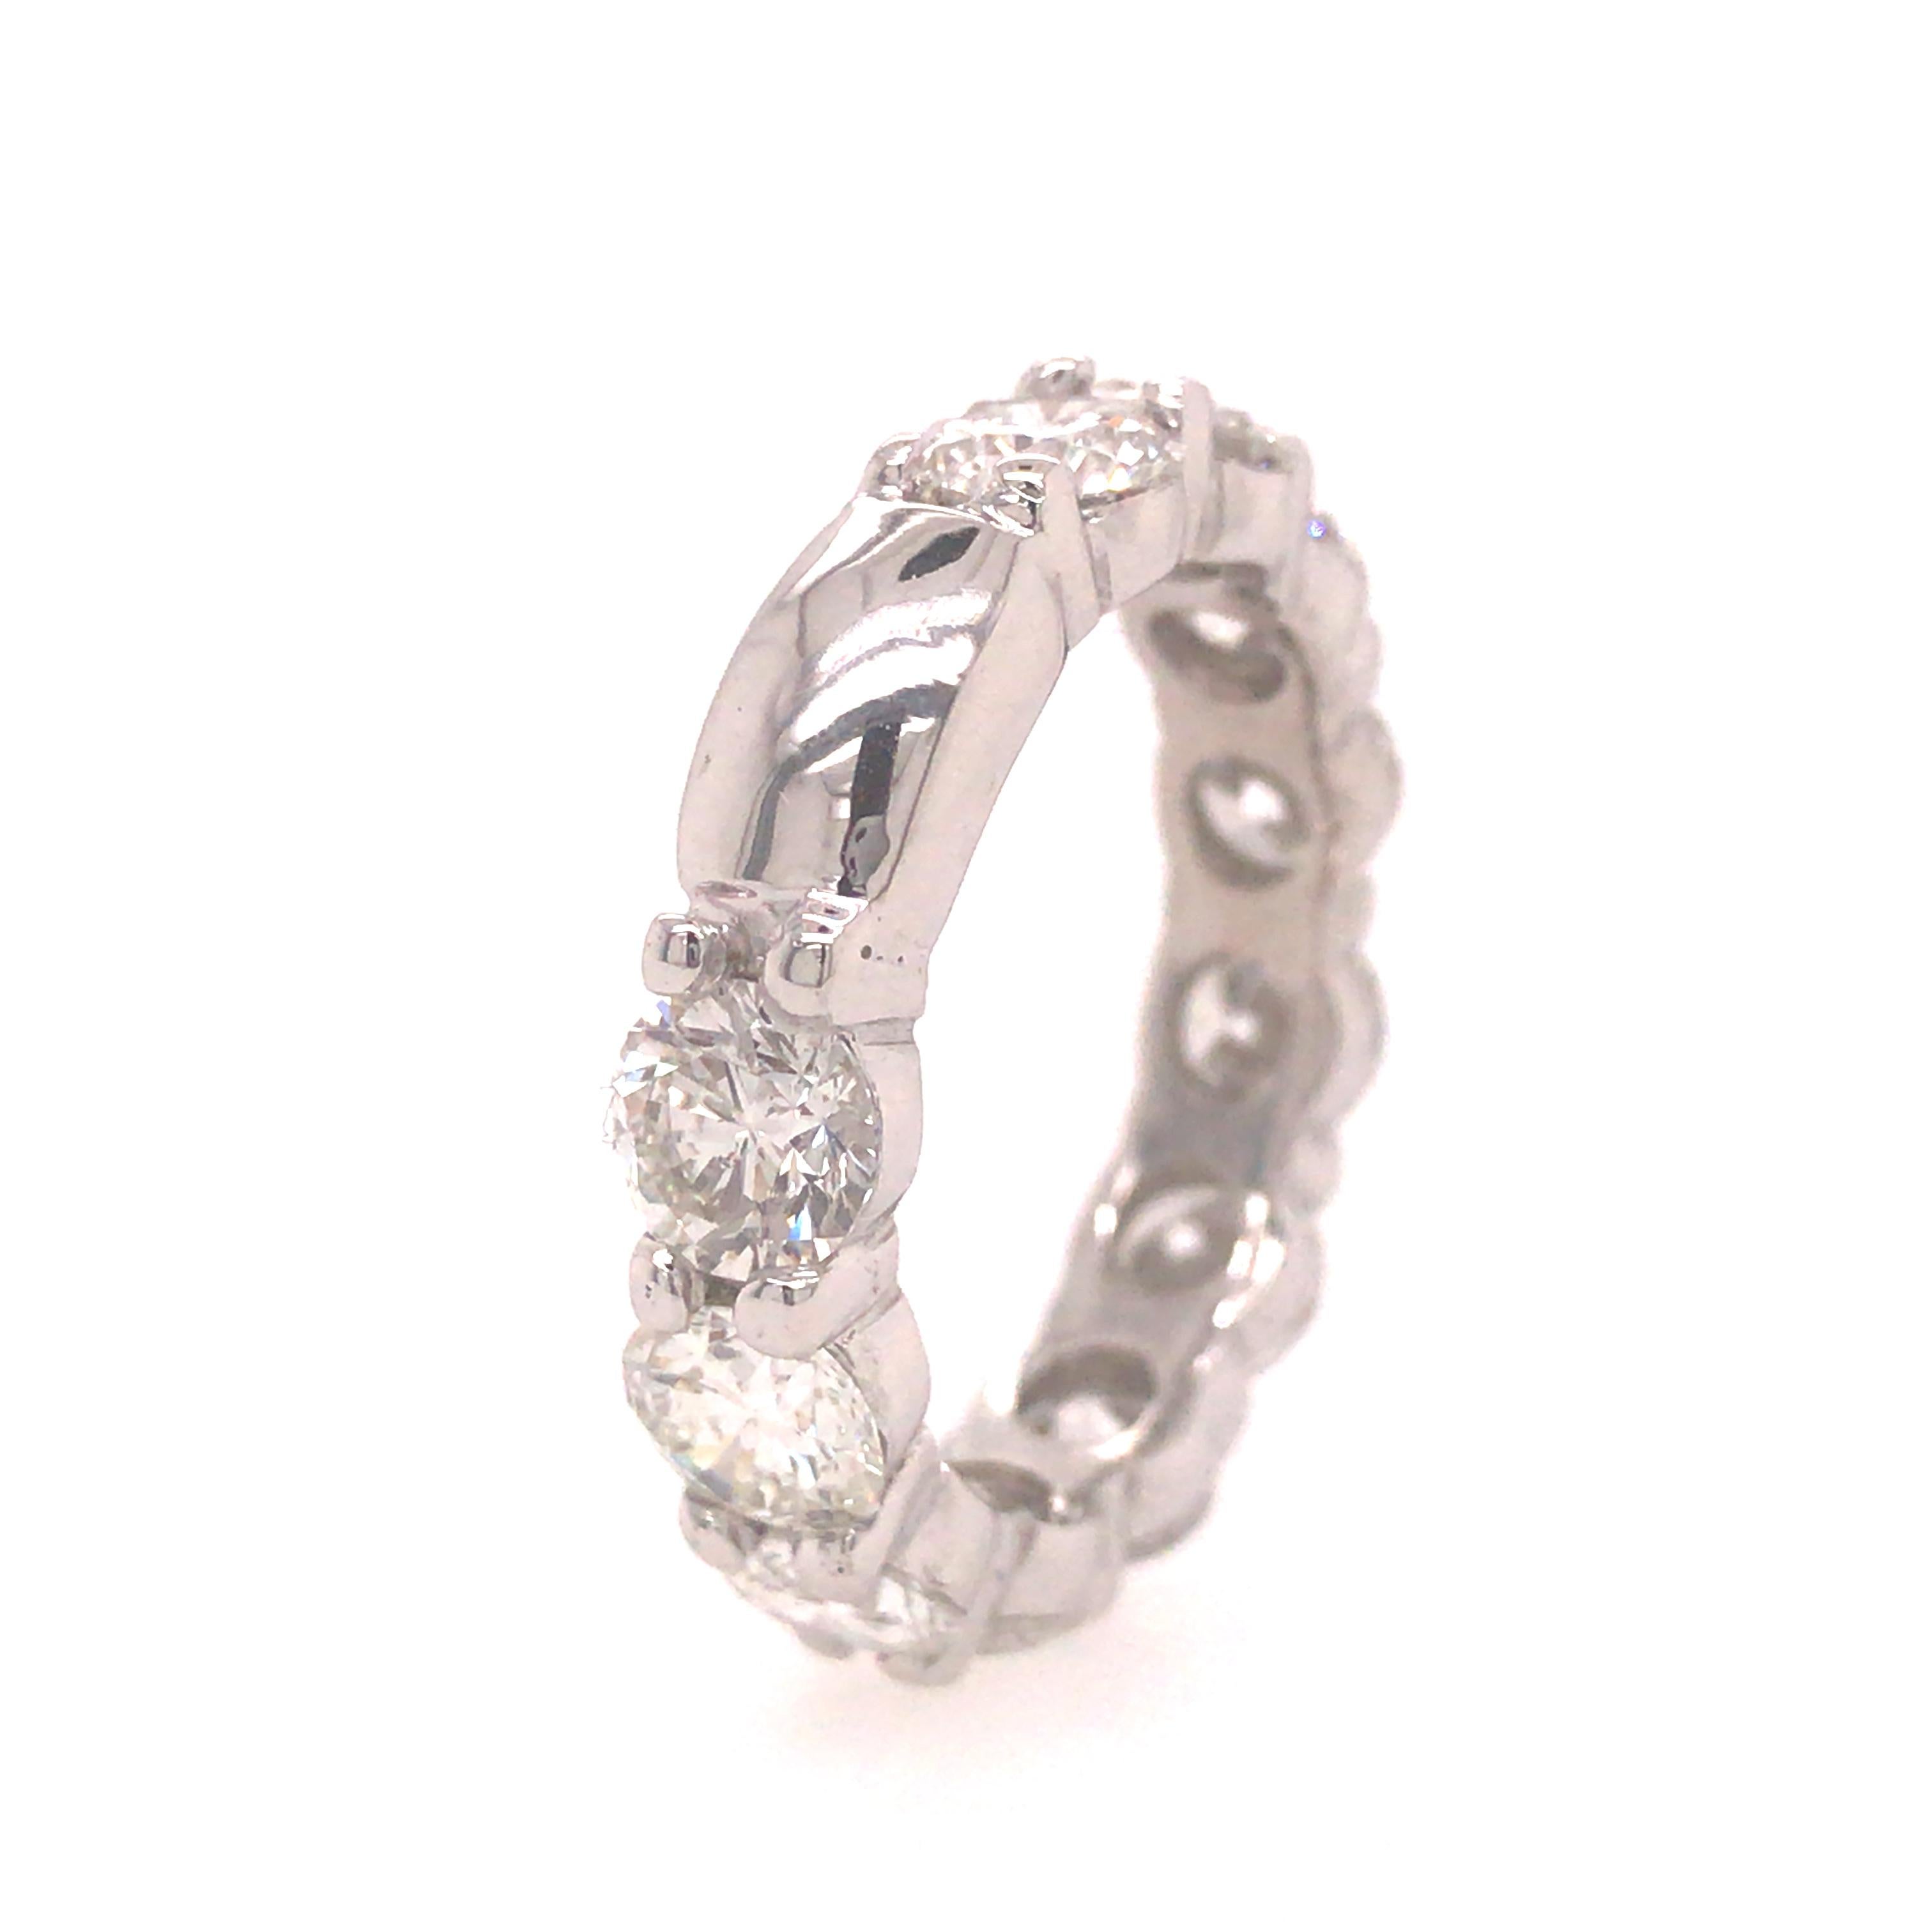 Shared Prong Diamond Eternity Band in Platinum.  (11) Round Brilliant Cut Diamonds weighing approximately 6.05 carat total weight, G-I in color and VS-I1 in clarity are expertly set. 3/16 in width. Ring size 8.  9.17 grams.